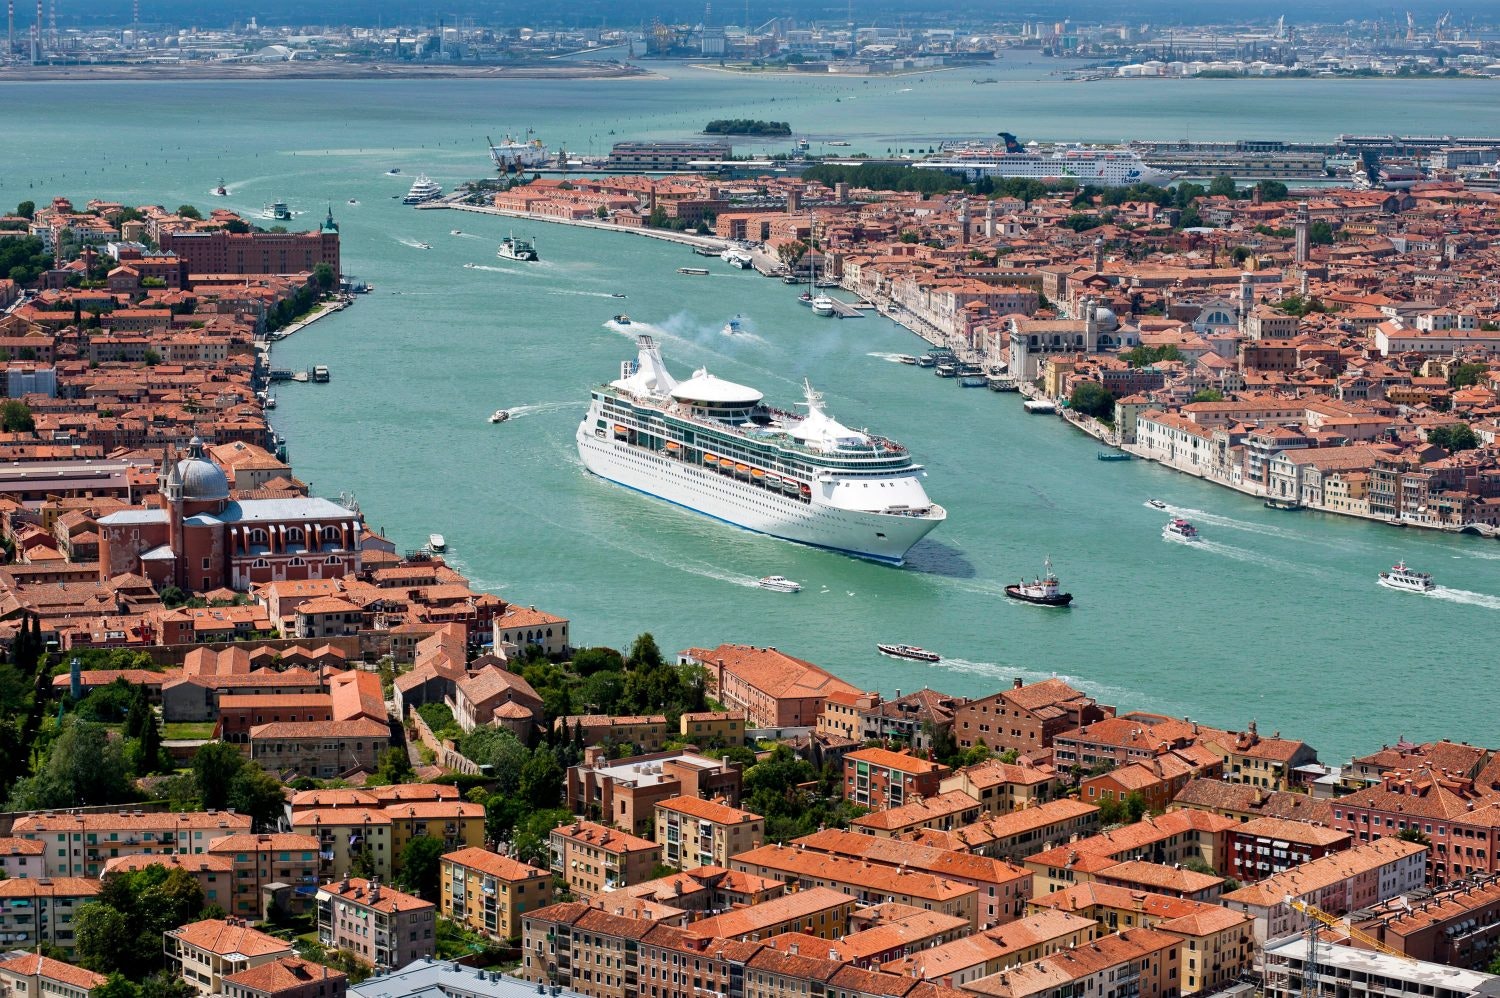 A cruise ship crossing the Grand Canal in Venice, Italy